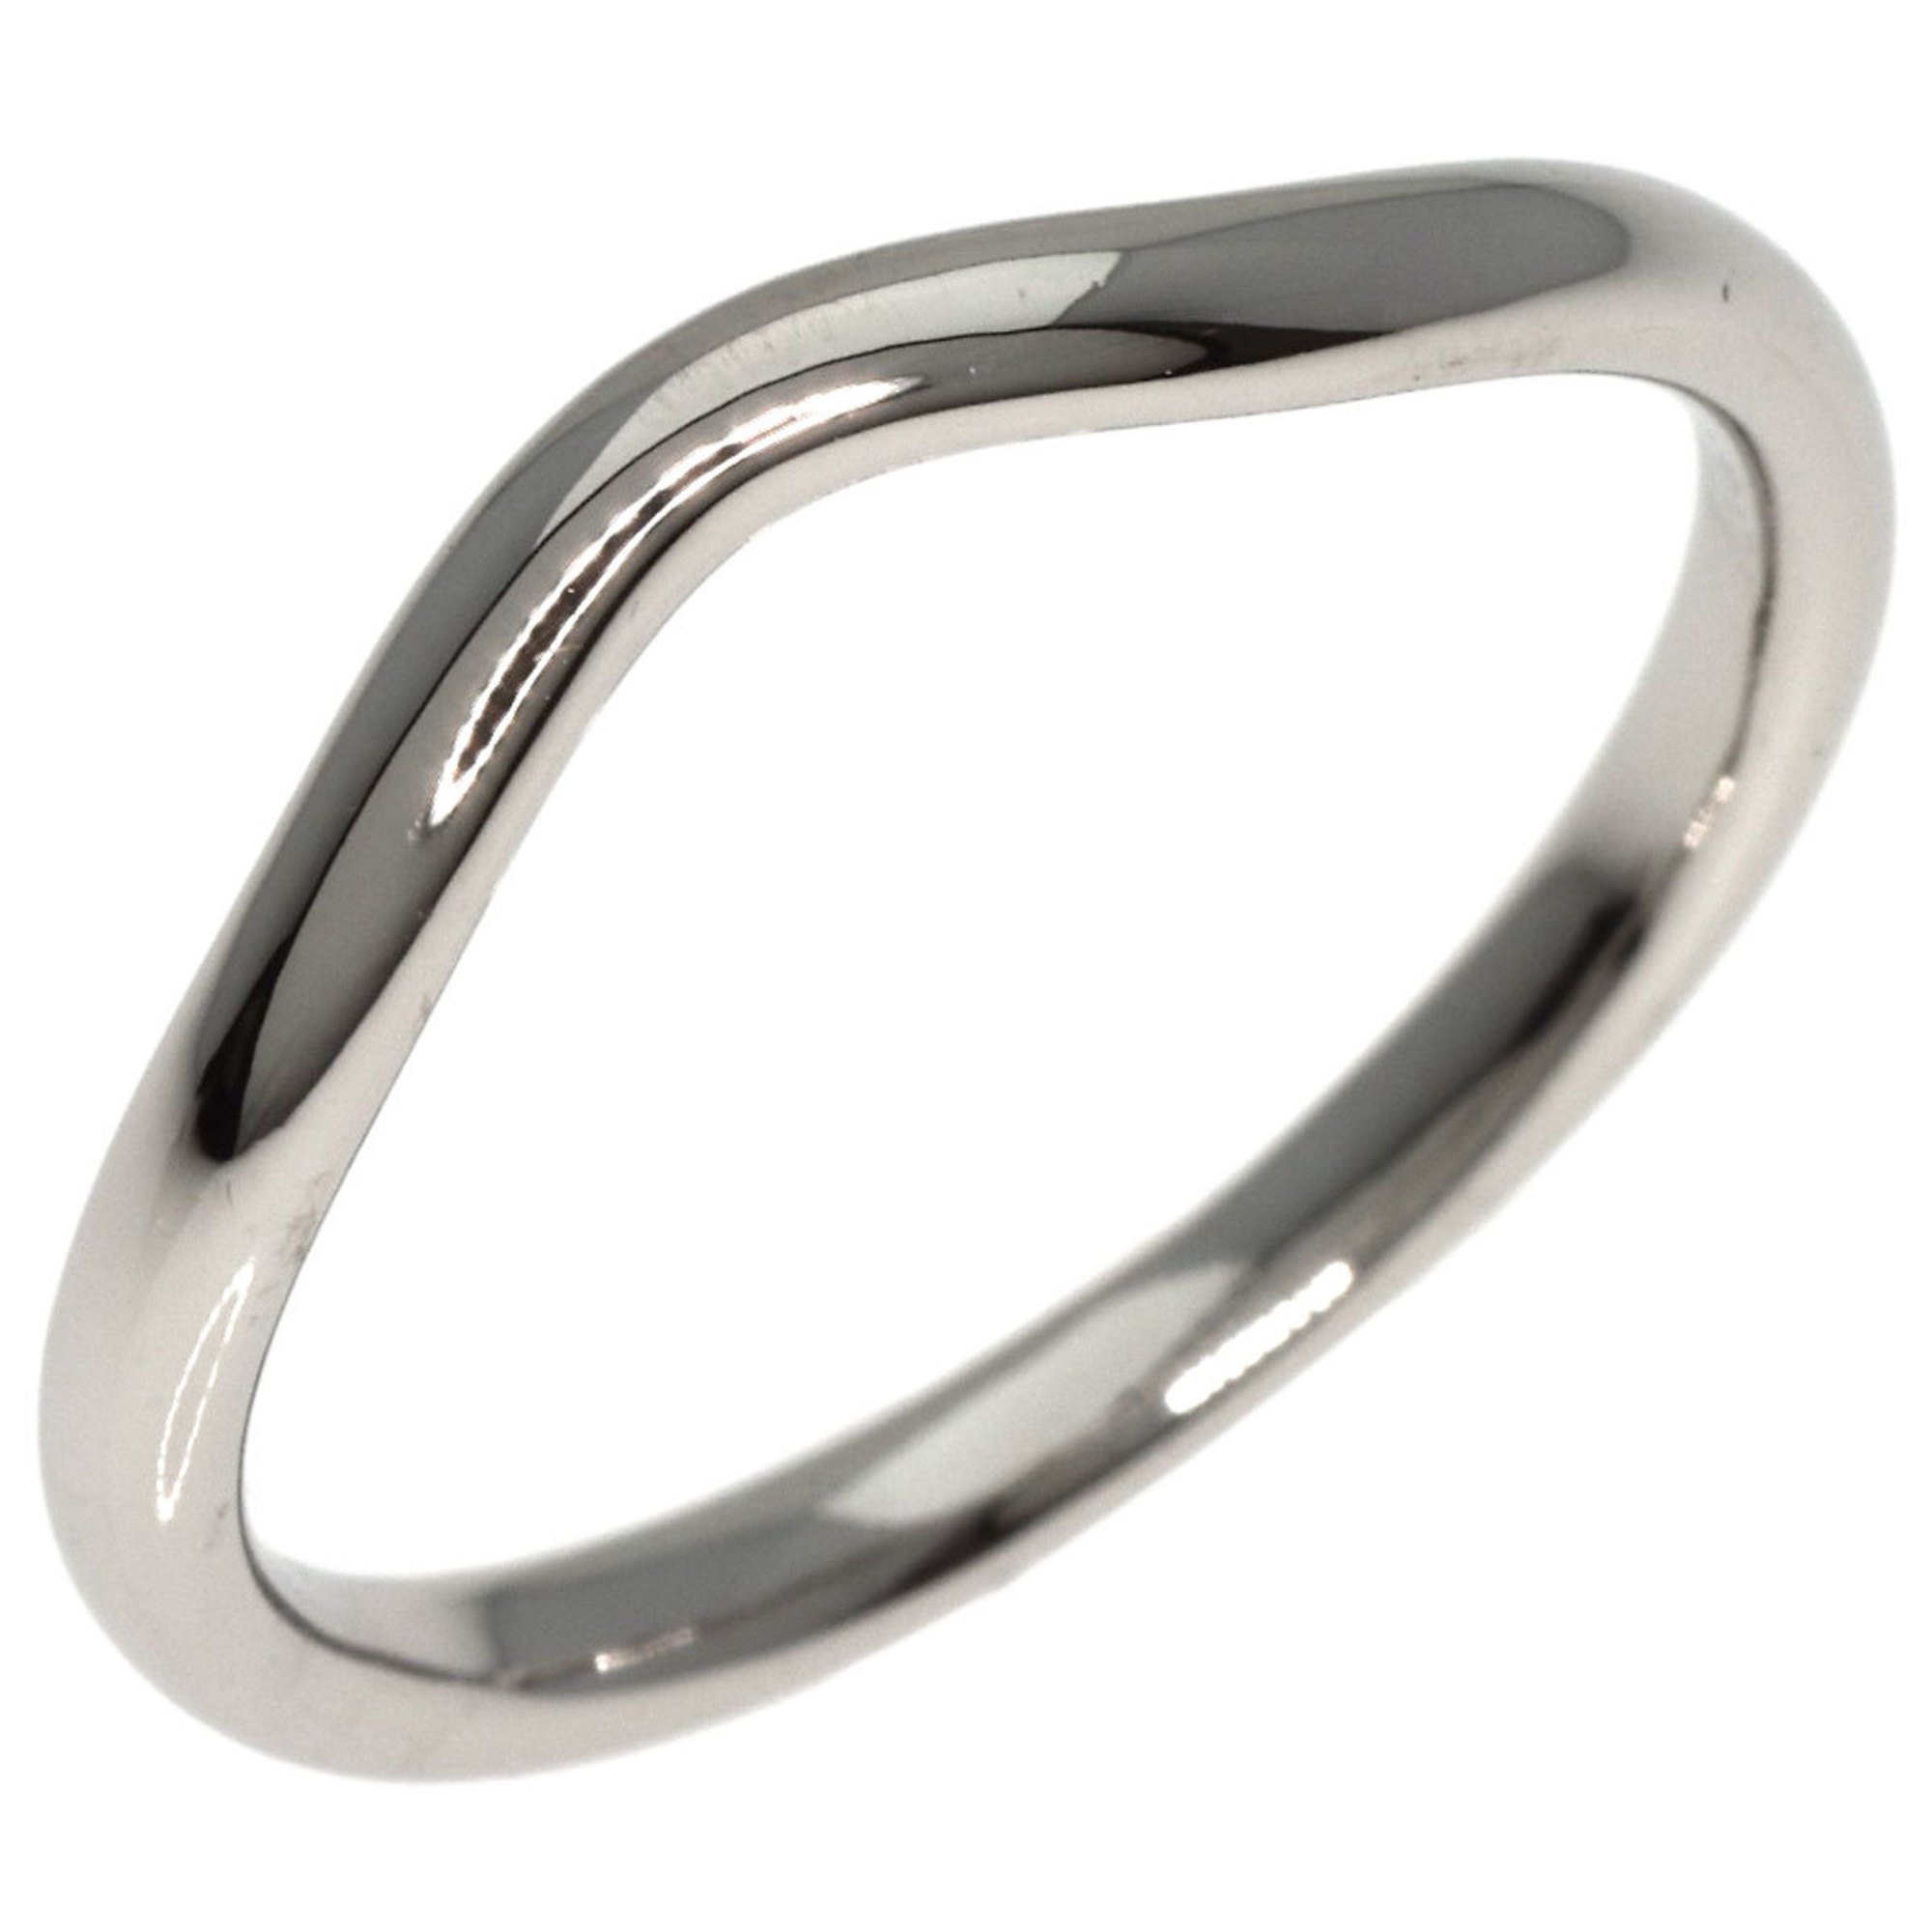 Tiffany Curved Band Ring, Platinum PT950, Women's